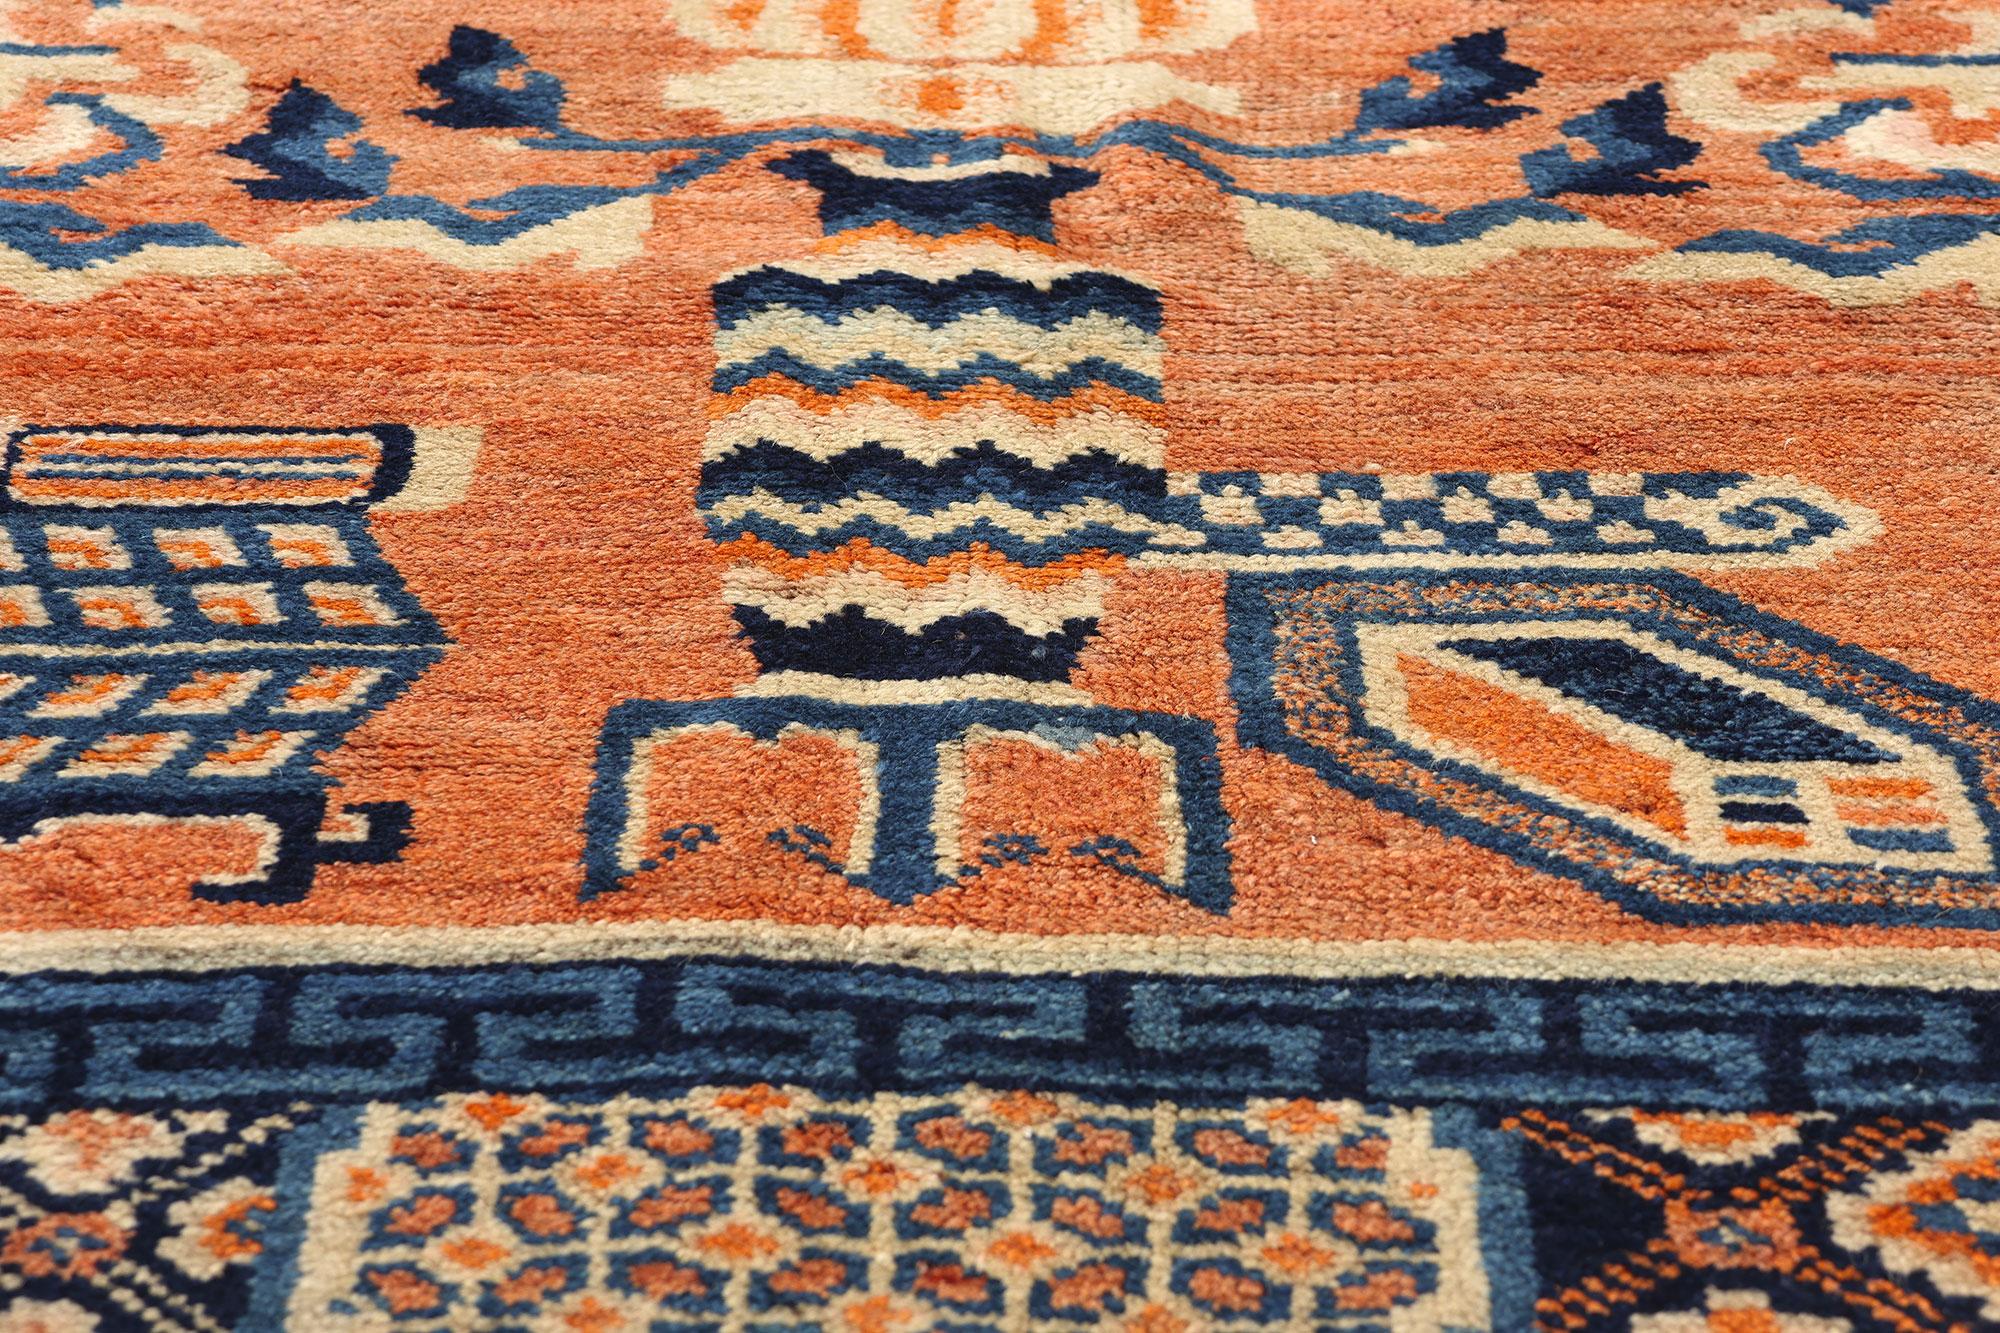 Vintage Orange Chinese Baotou Vase Pictorial Carpet In Good Condition For Sale In Dallas, TX